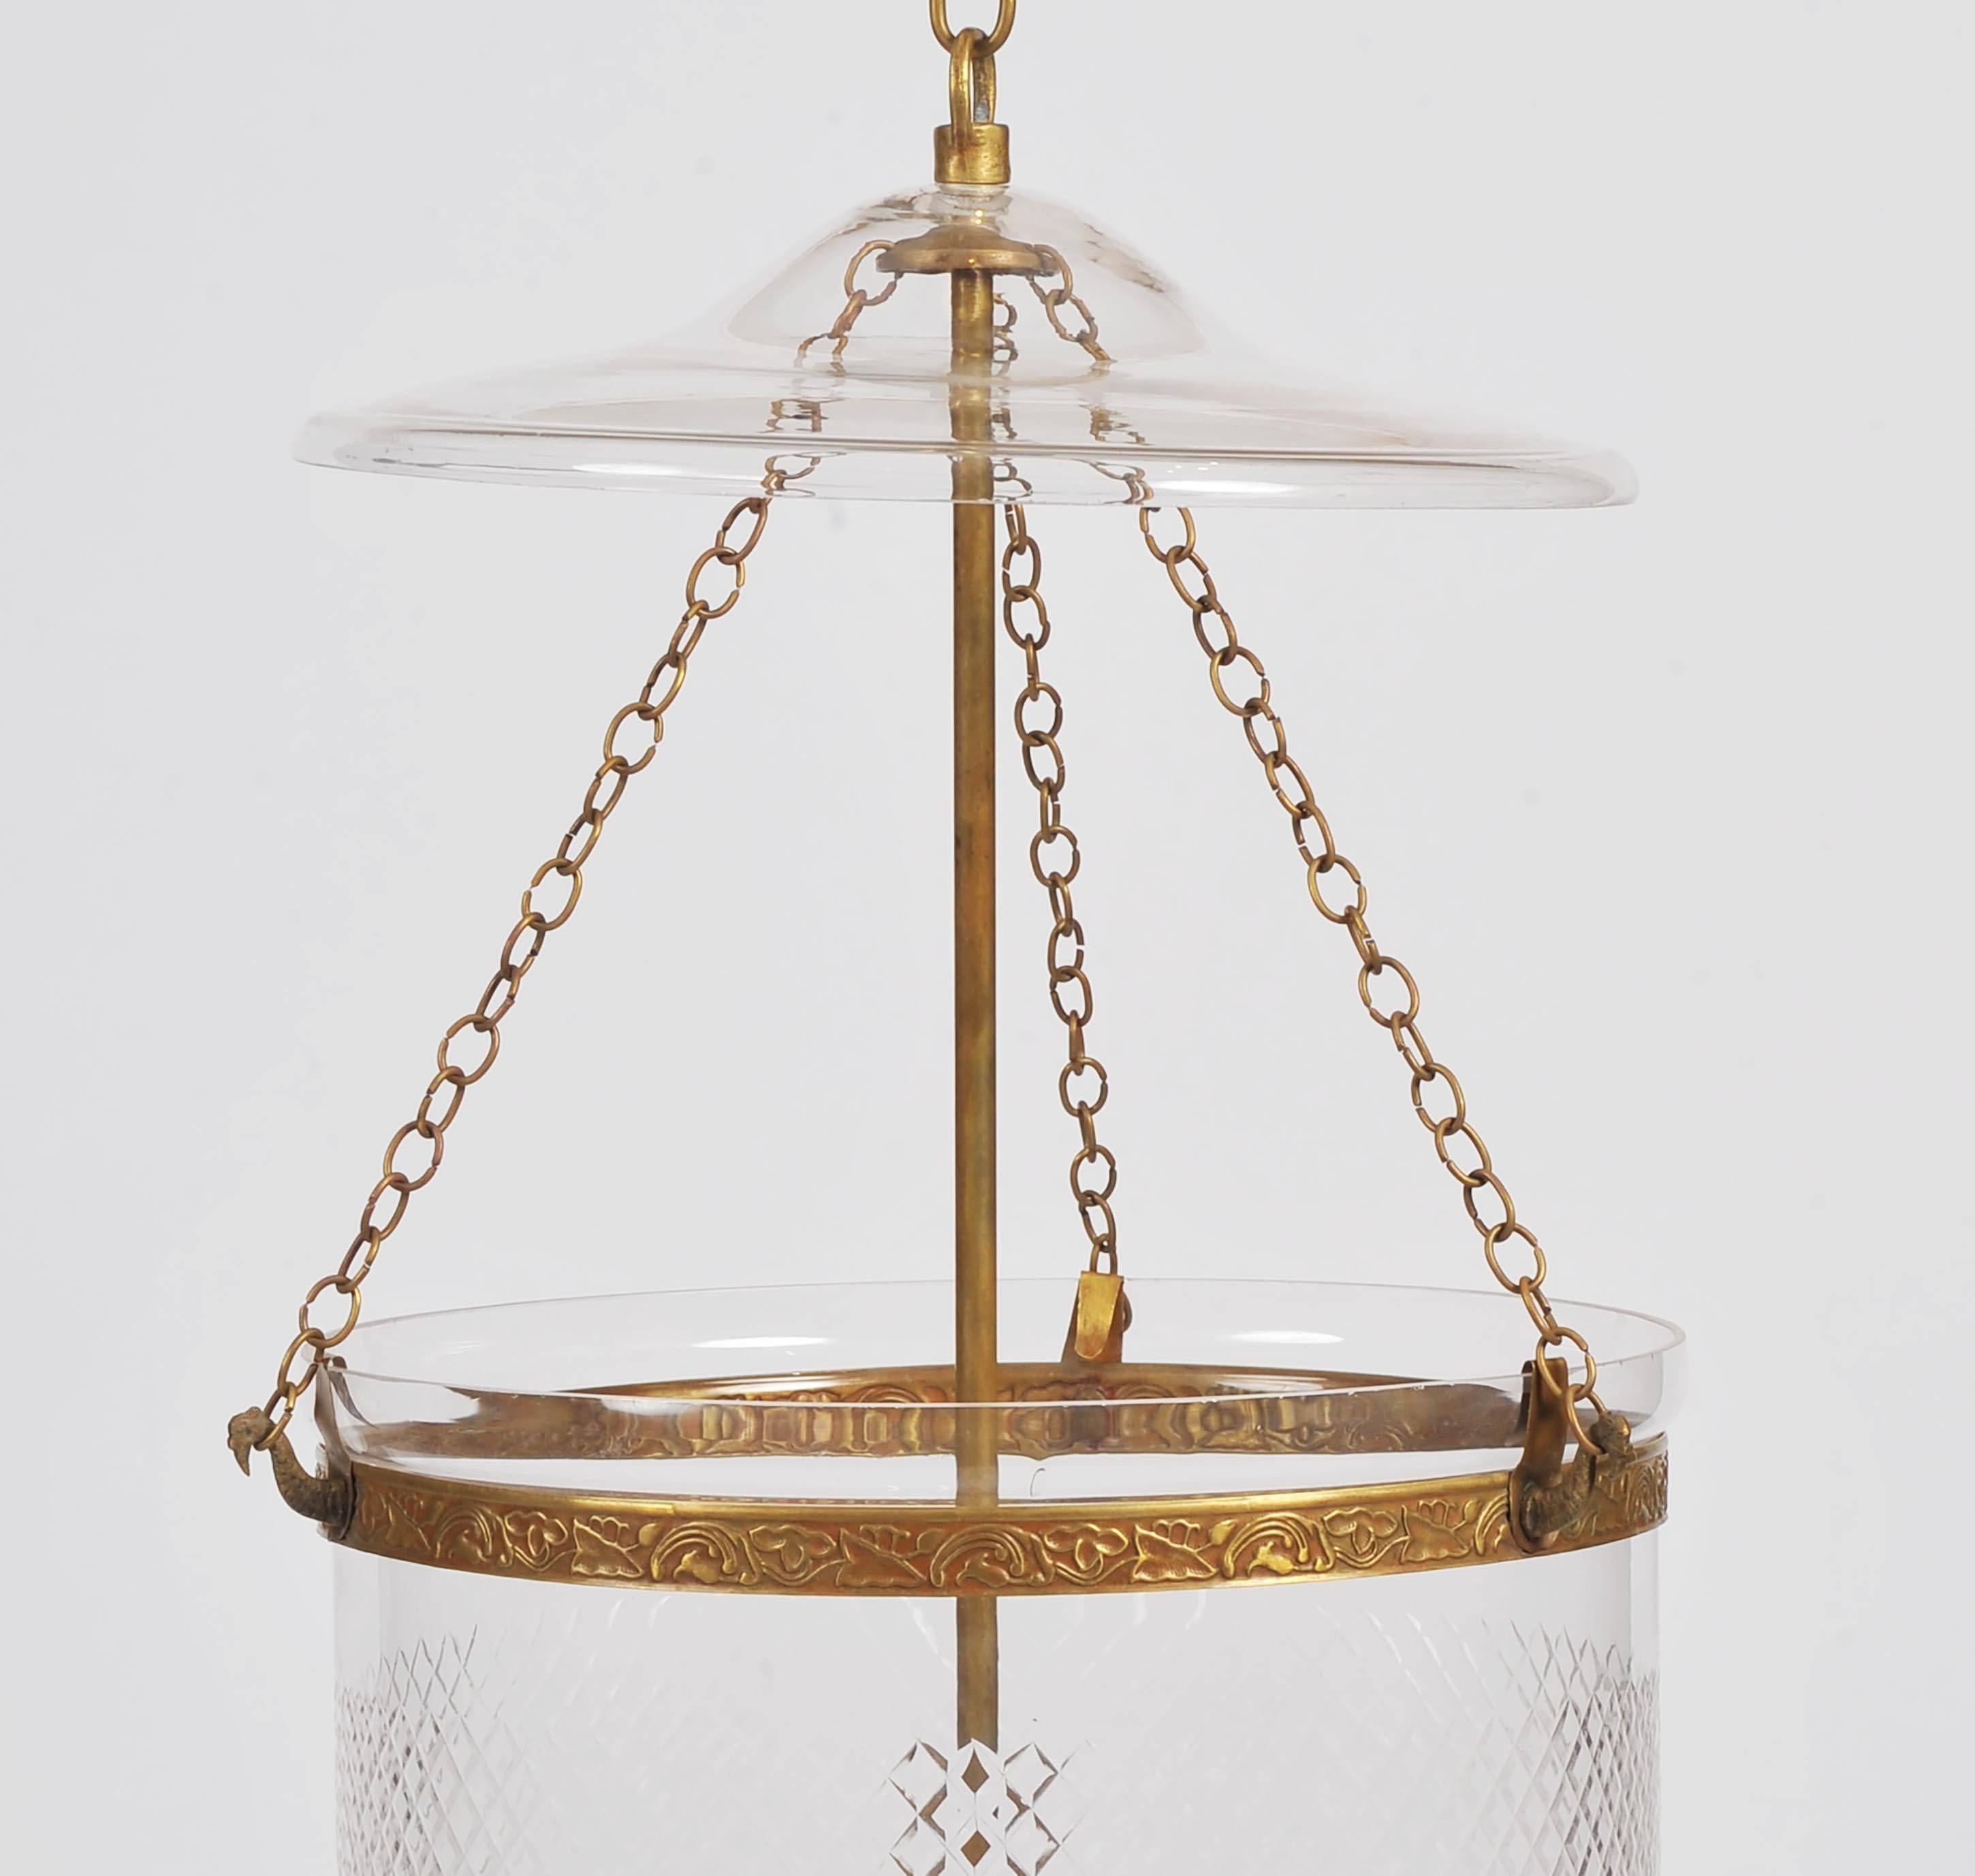 This elegant and well-proportioned handmade glass storm lantern features a hobnail design with polished brass hardware. The lantern has a separate top plate and features an internal four light fitting. The light measures 14 in – 35.5 cm in diameter